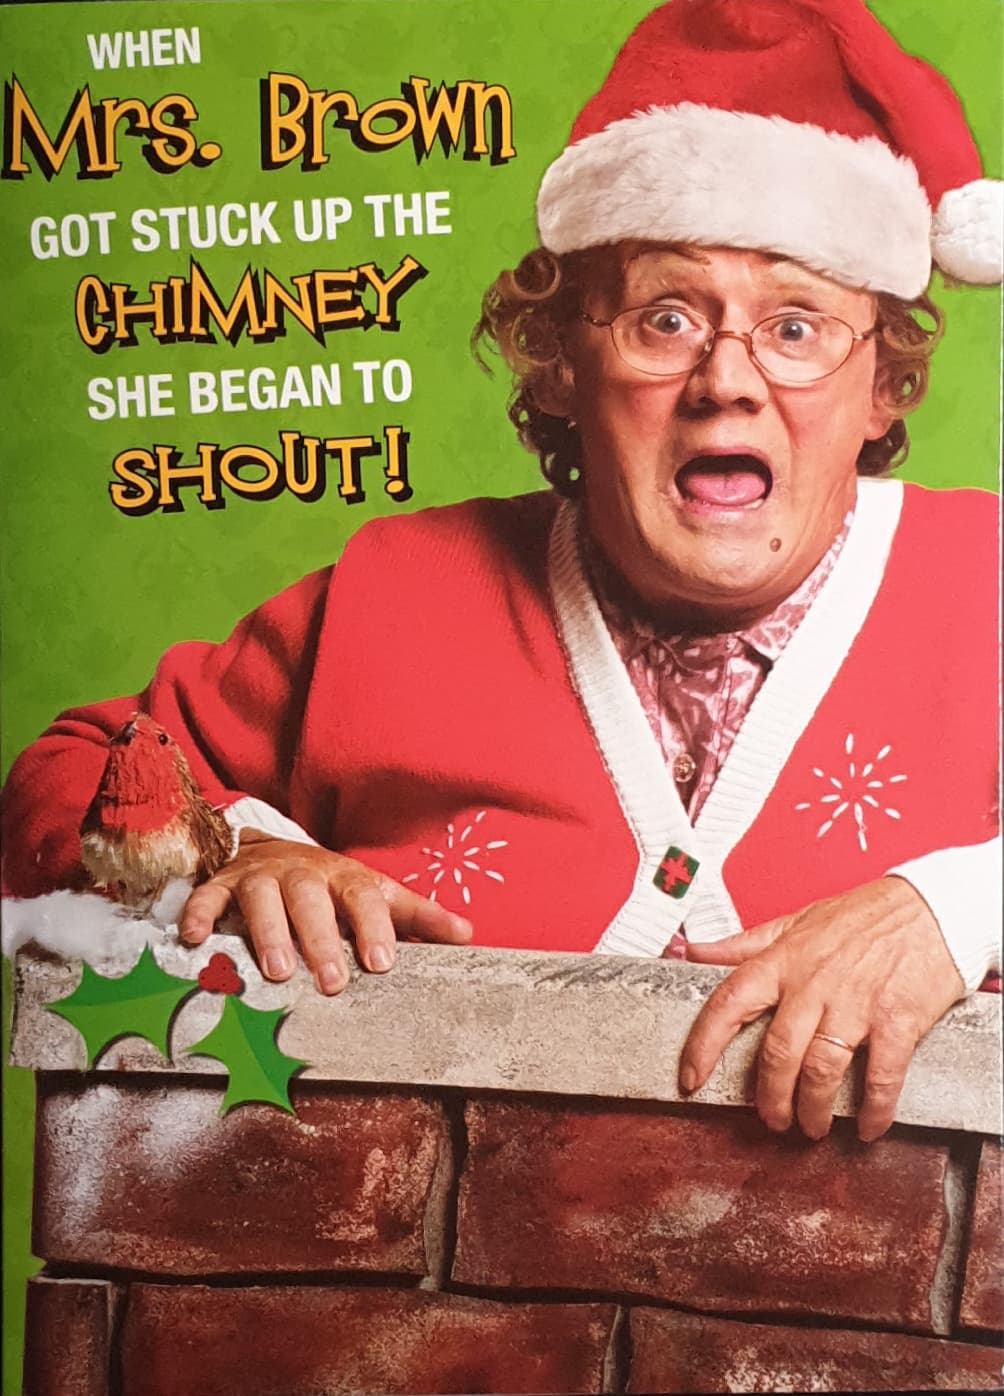 Funny Christmas Card -Stuck In Chimney & Shout